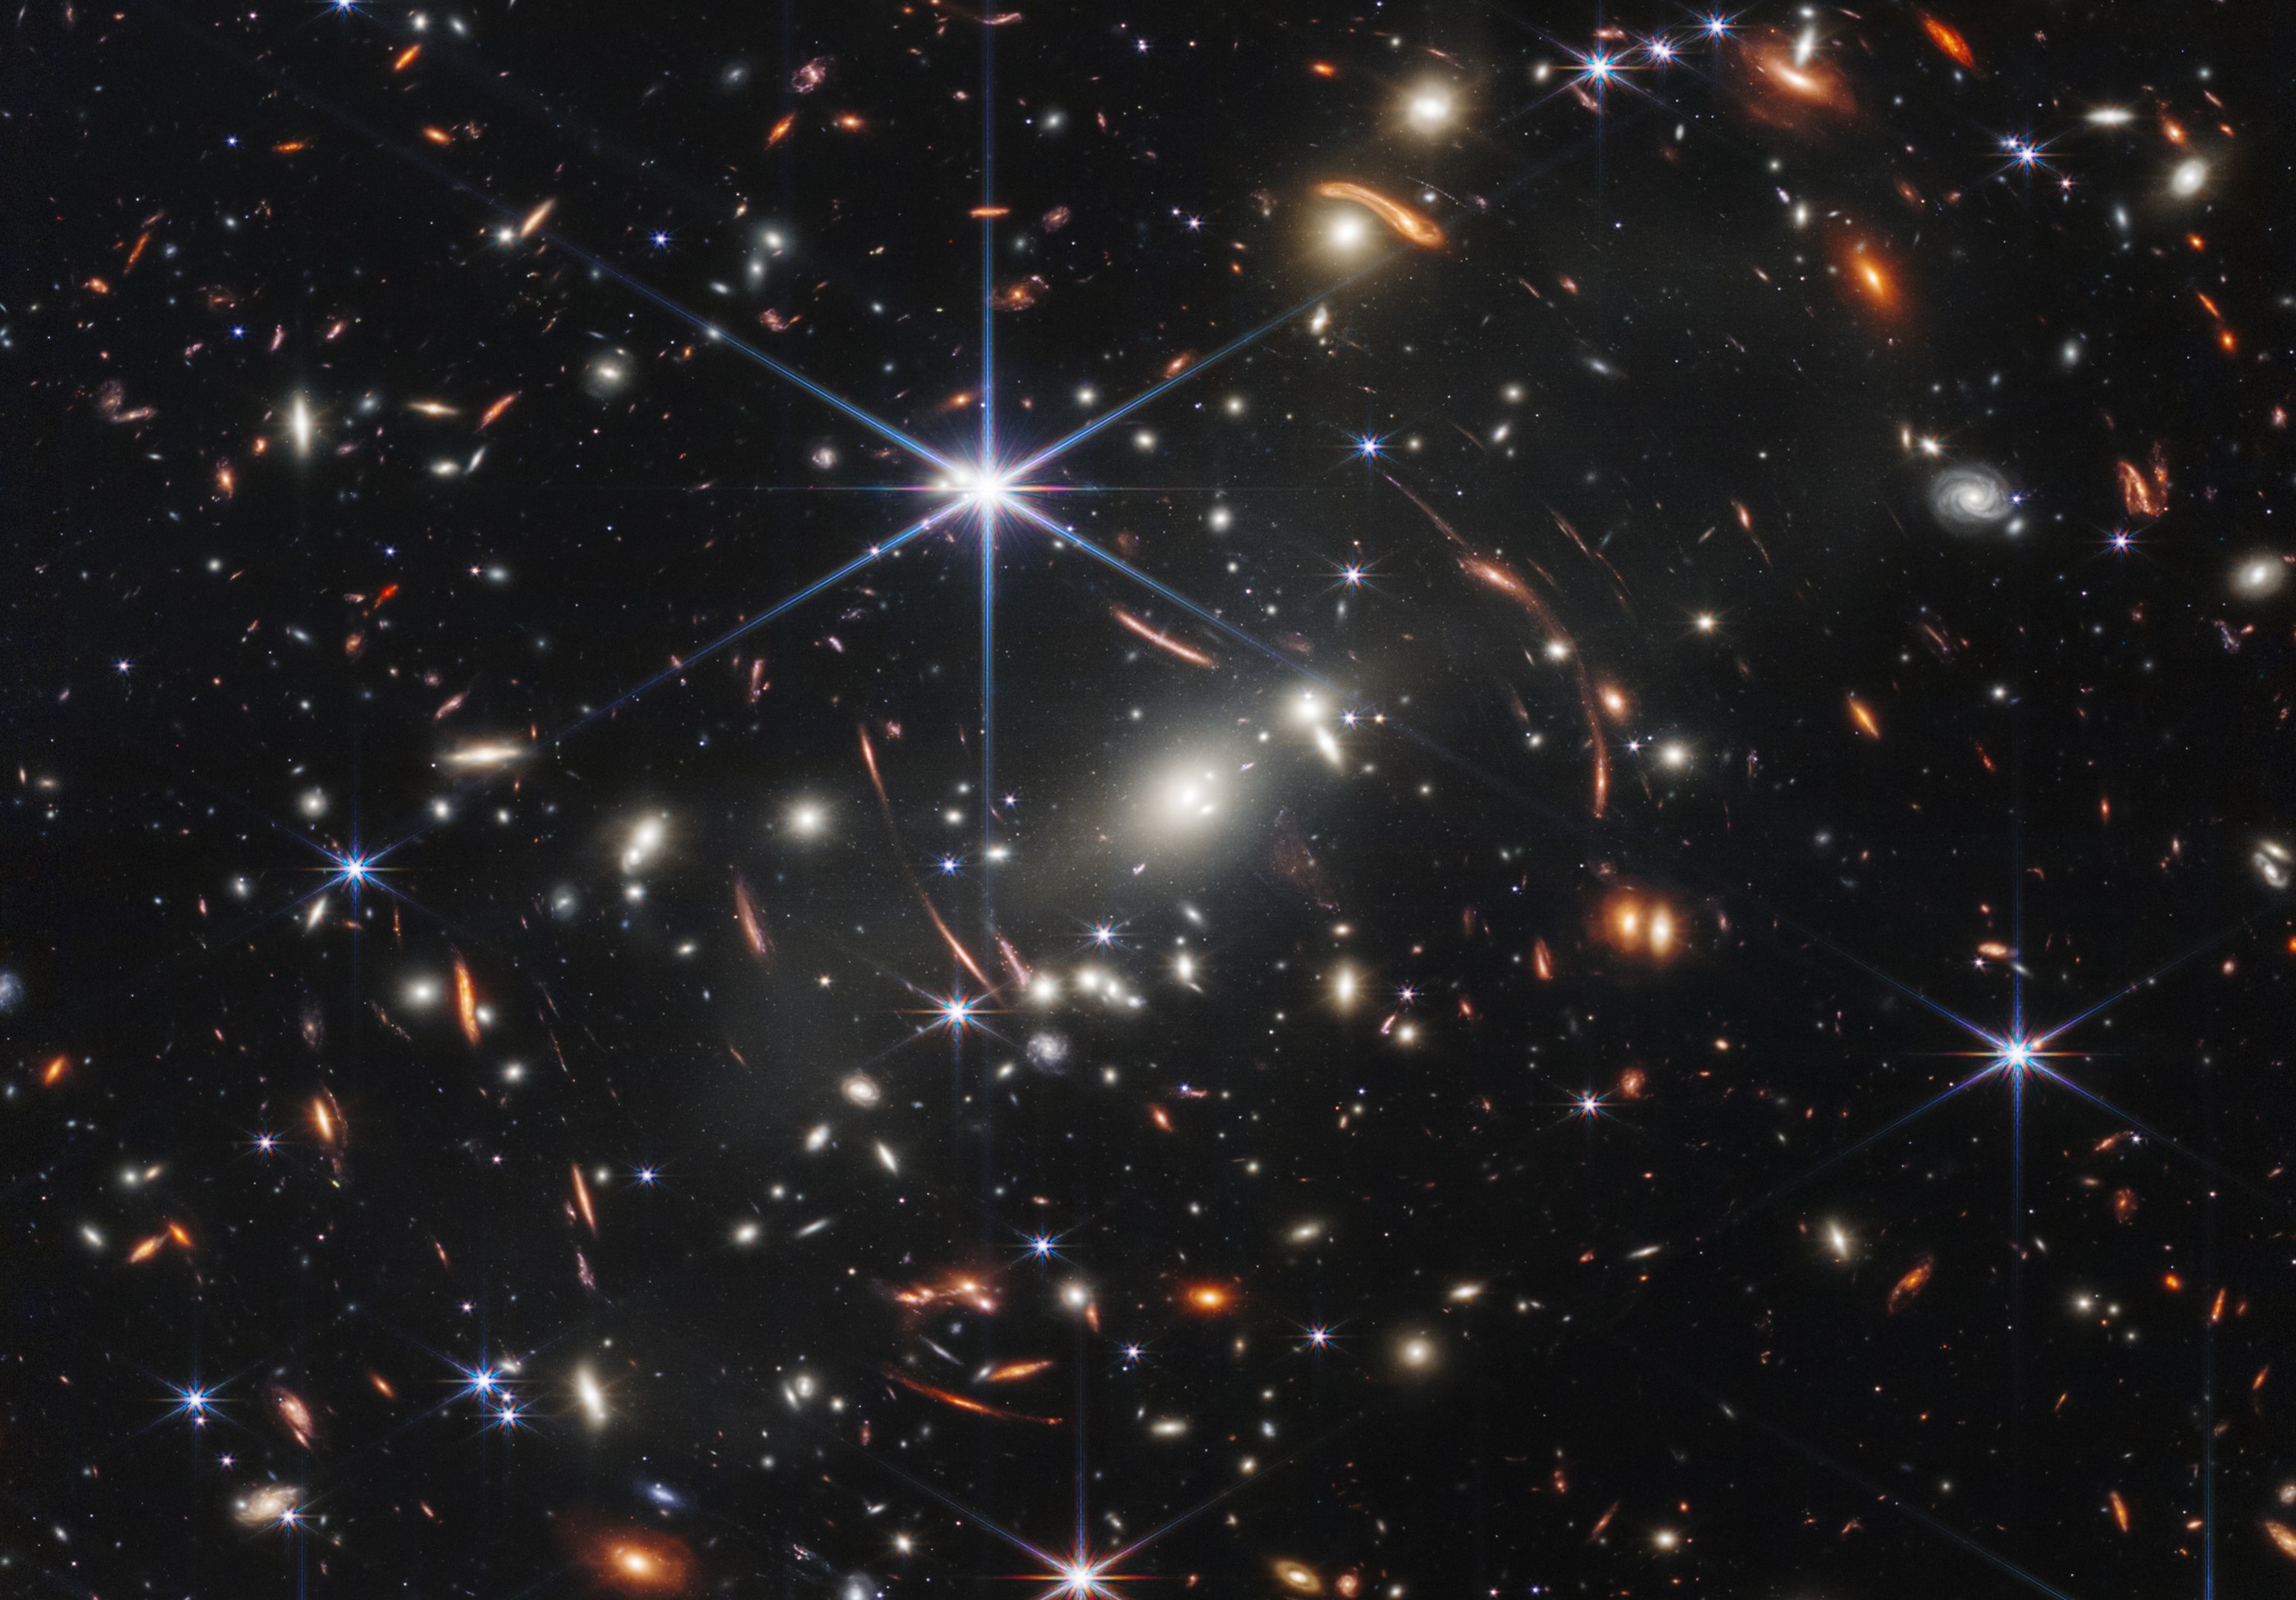 Webb’s First Deep Field is galaxy cluster SMACS 0723, and it is teeming with thousands of galaxies – including the faintest objects ever observed in the infrared.